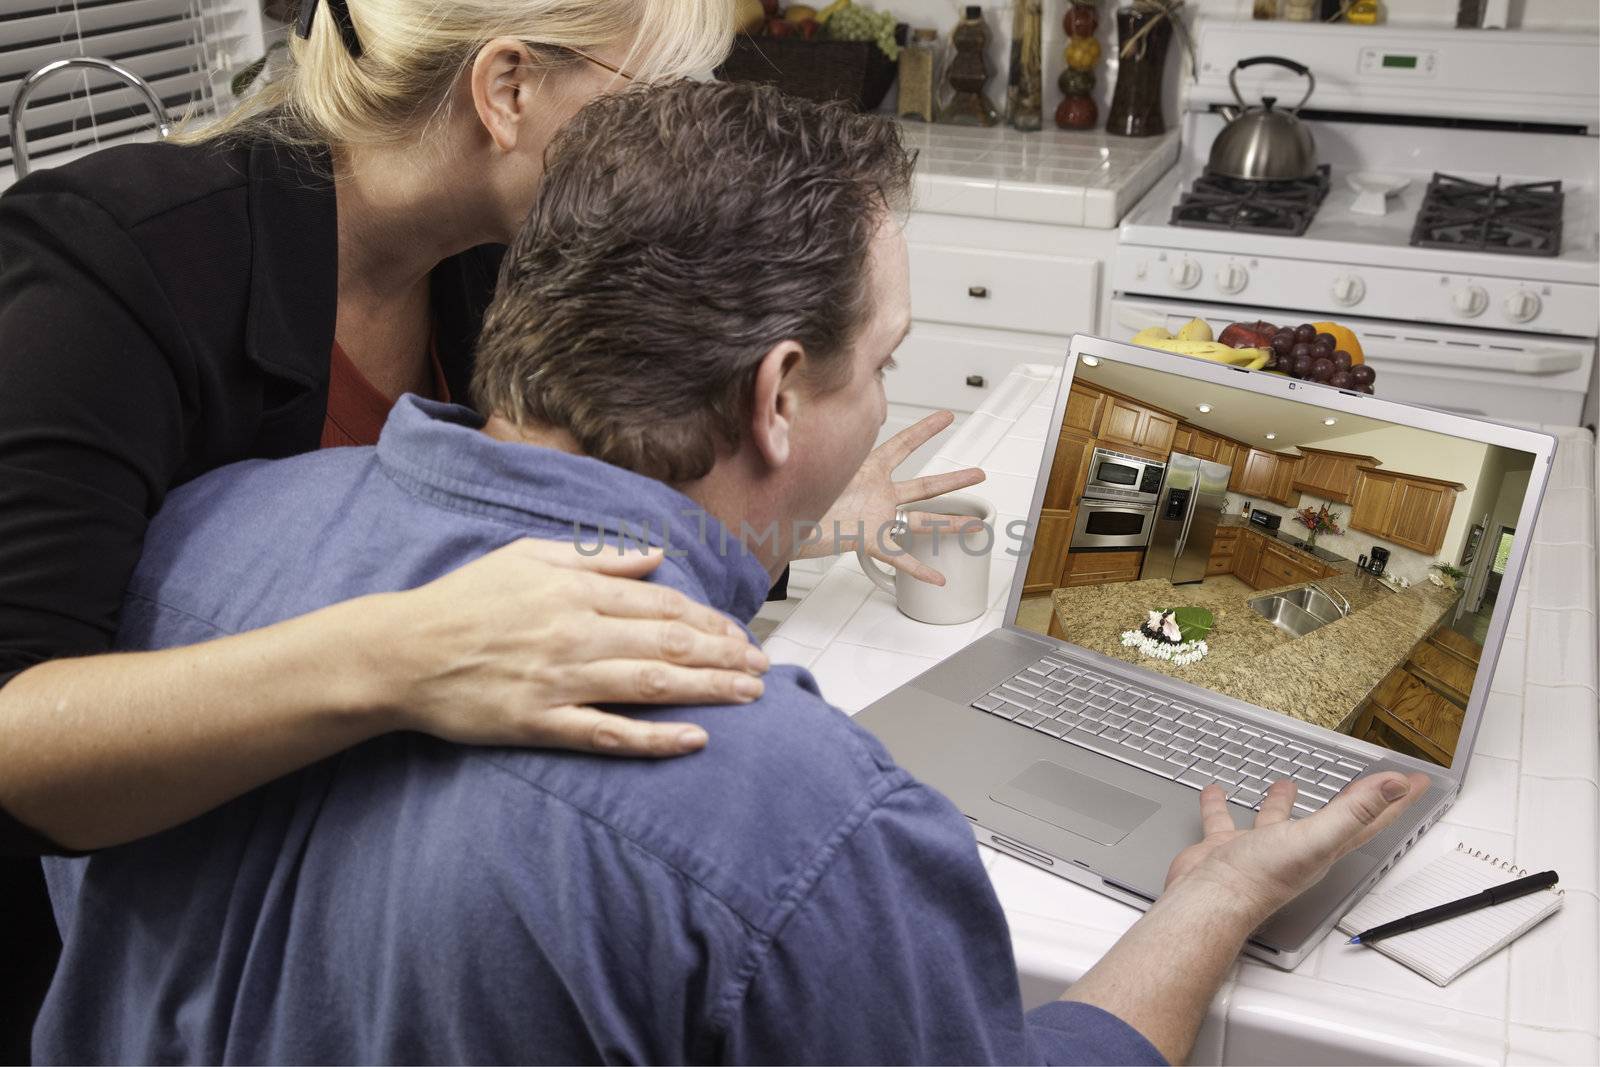 Couple In Kitchen Using Laptop to Research Home Improvement Ideas. Screen can be easily used for your own message or picture. Picture on screen is my copyright as well.